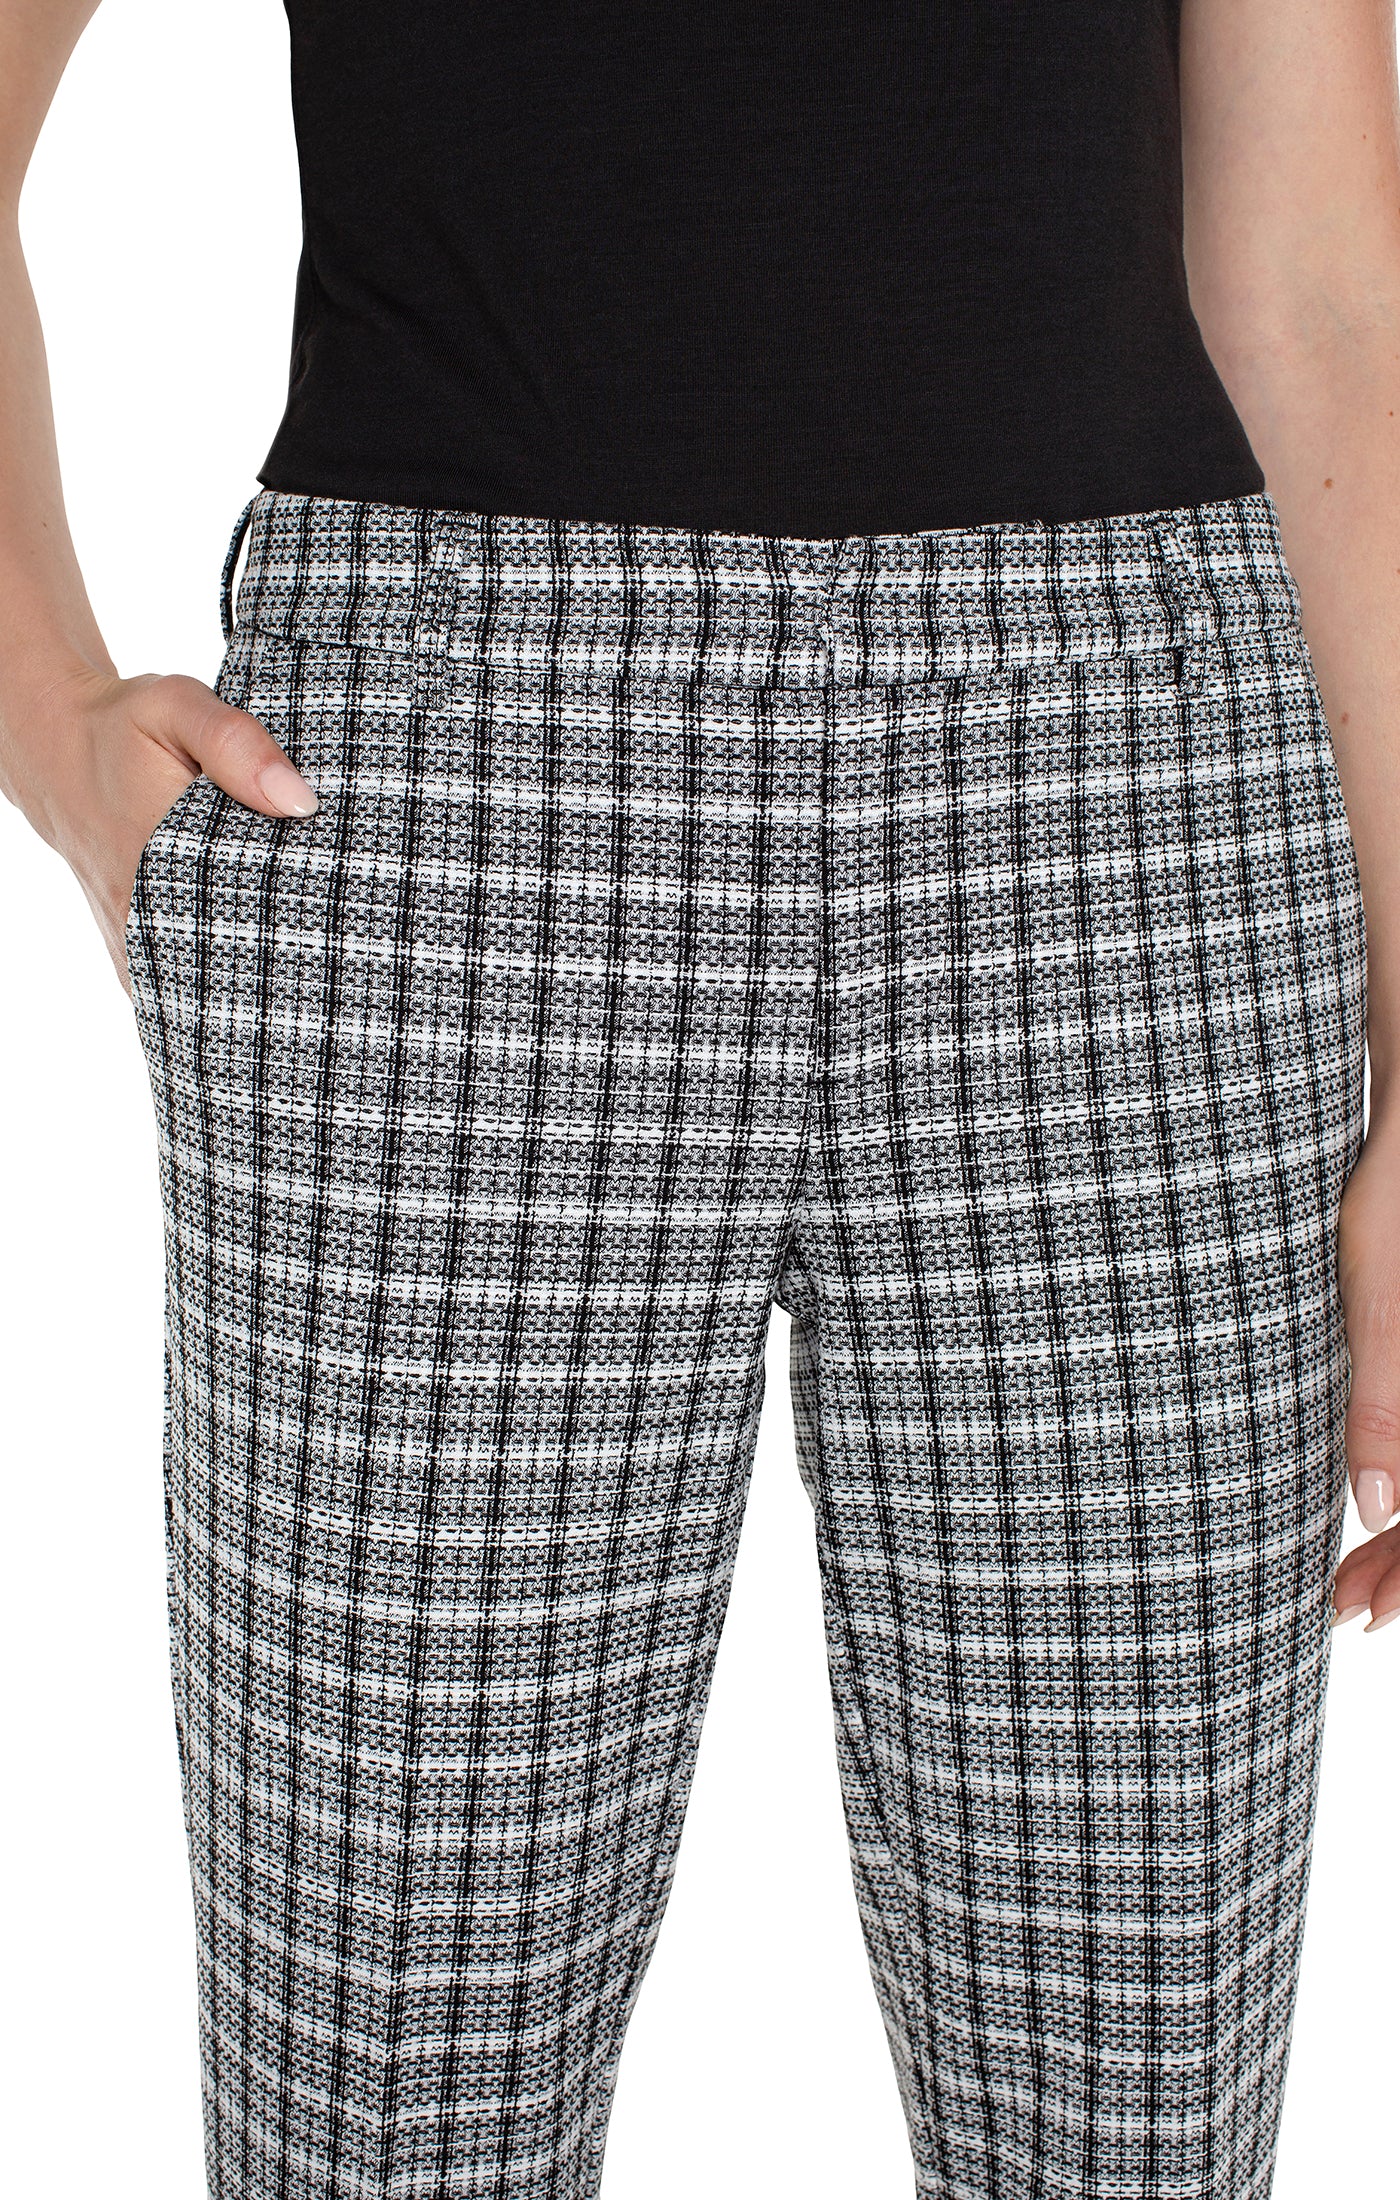 Liverpool Kelsey Trouser black/white Plaid Close Up View